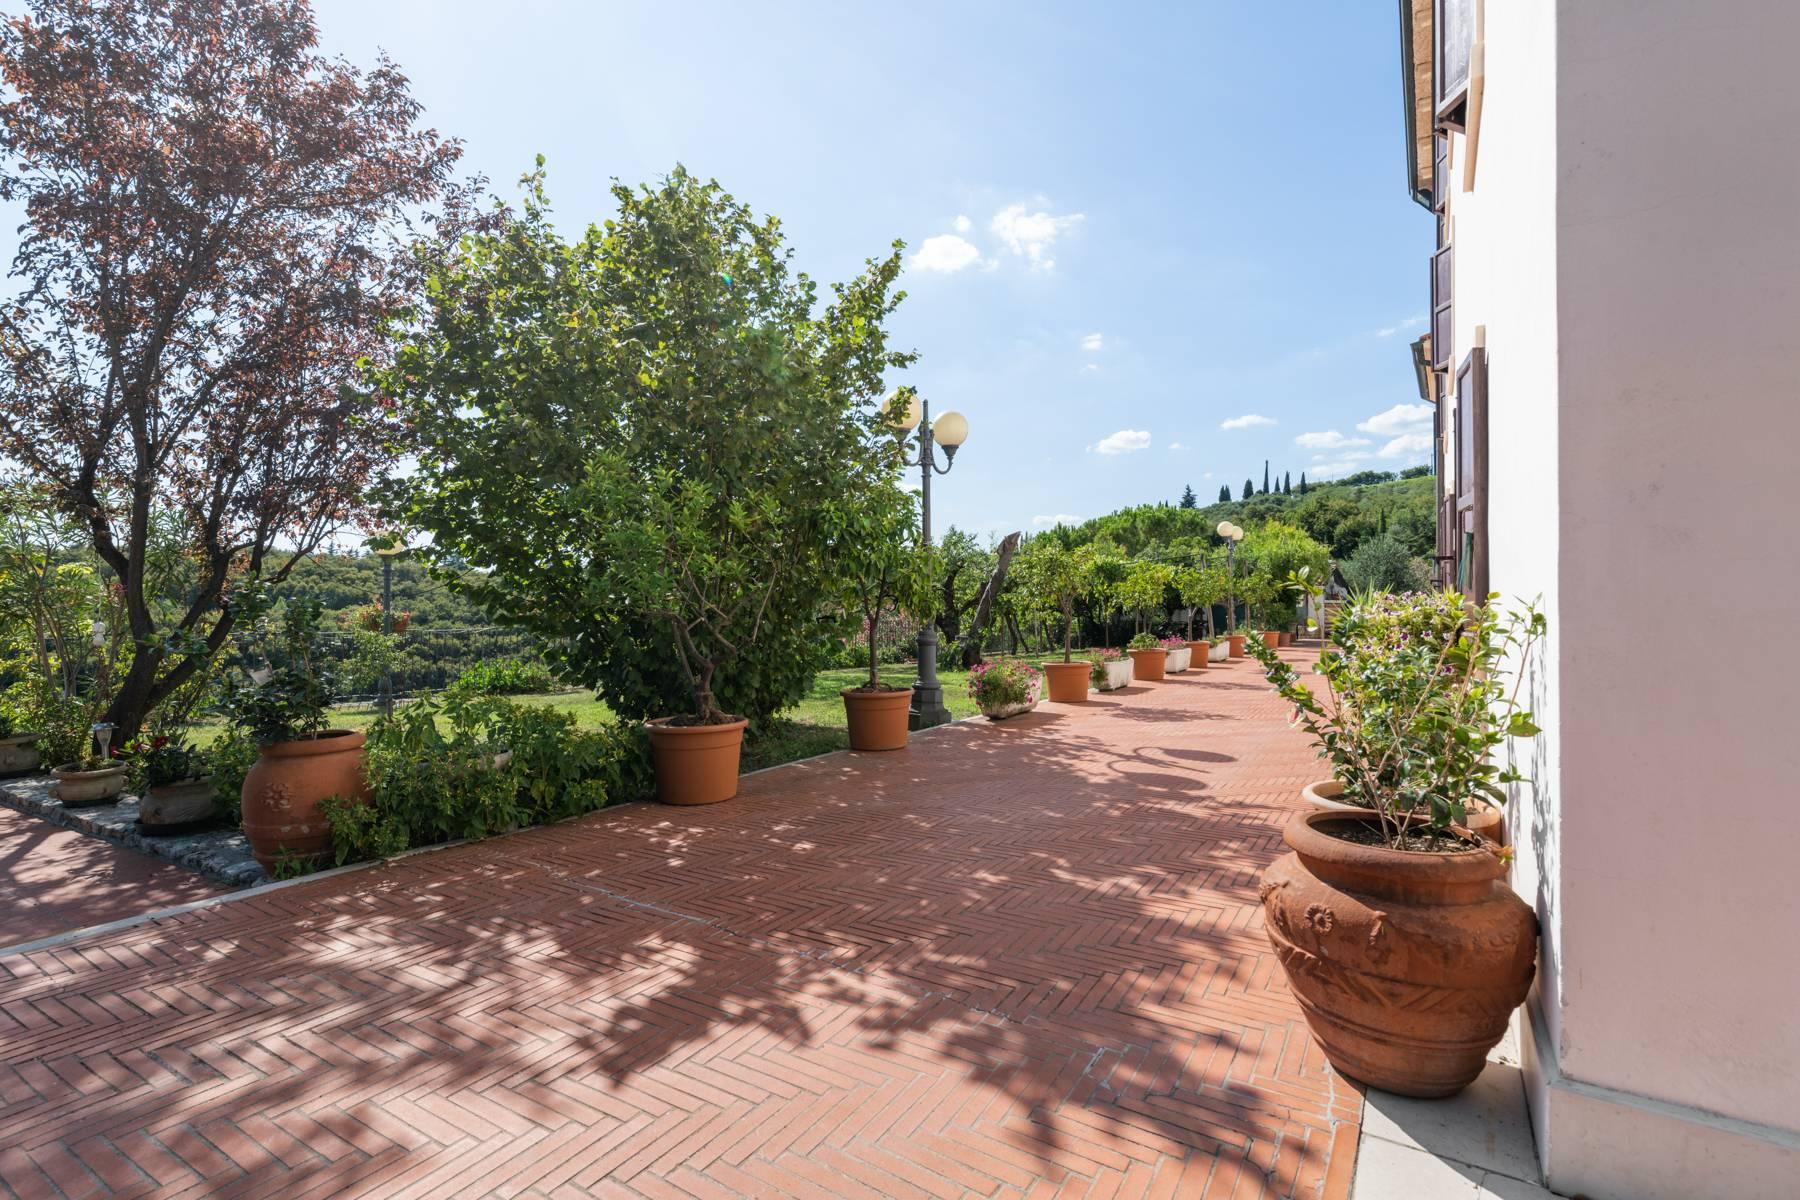 Historic country villa with swimming pool, tennis court and estate on the hills of Verona - 8